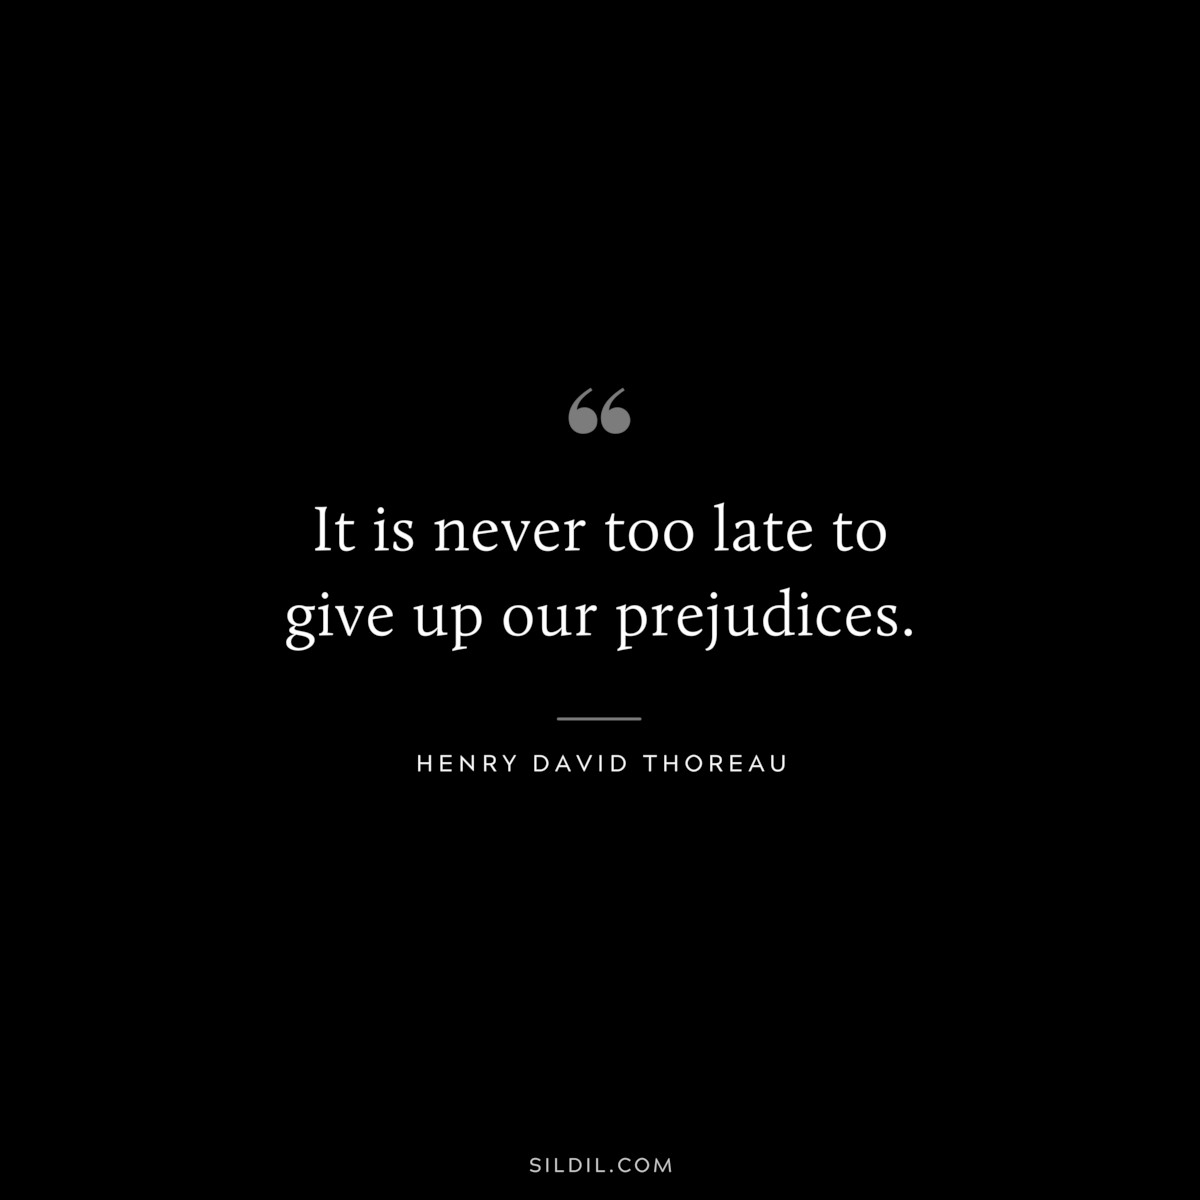 It is never too late to give up our prejudices. — Henry David Thoreau